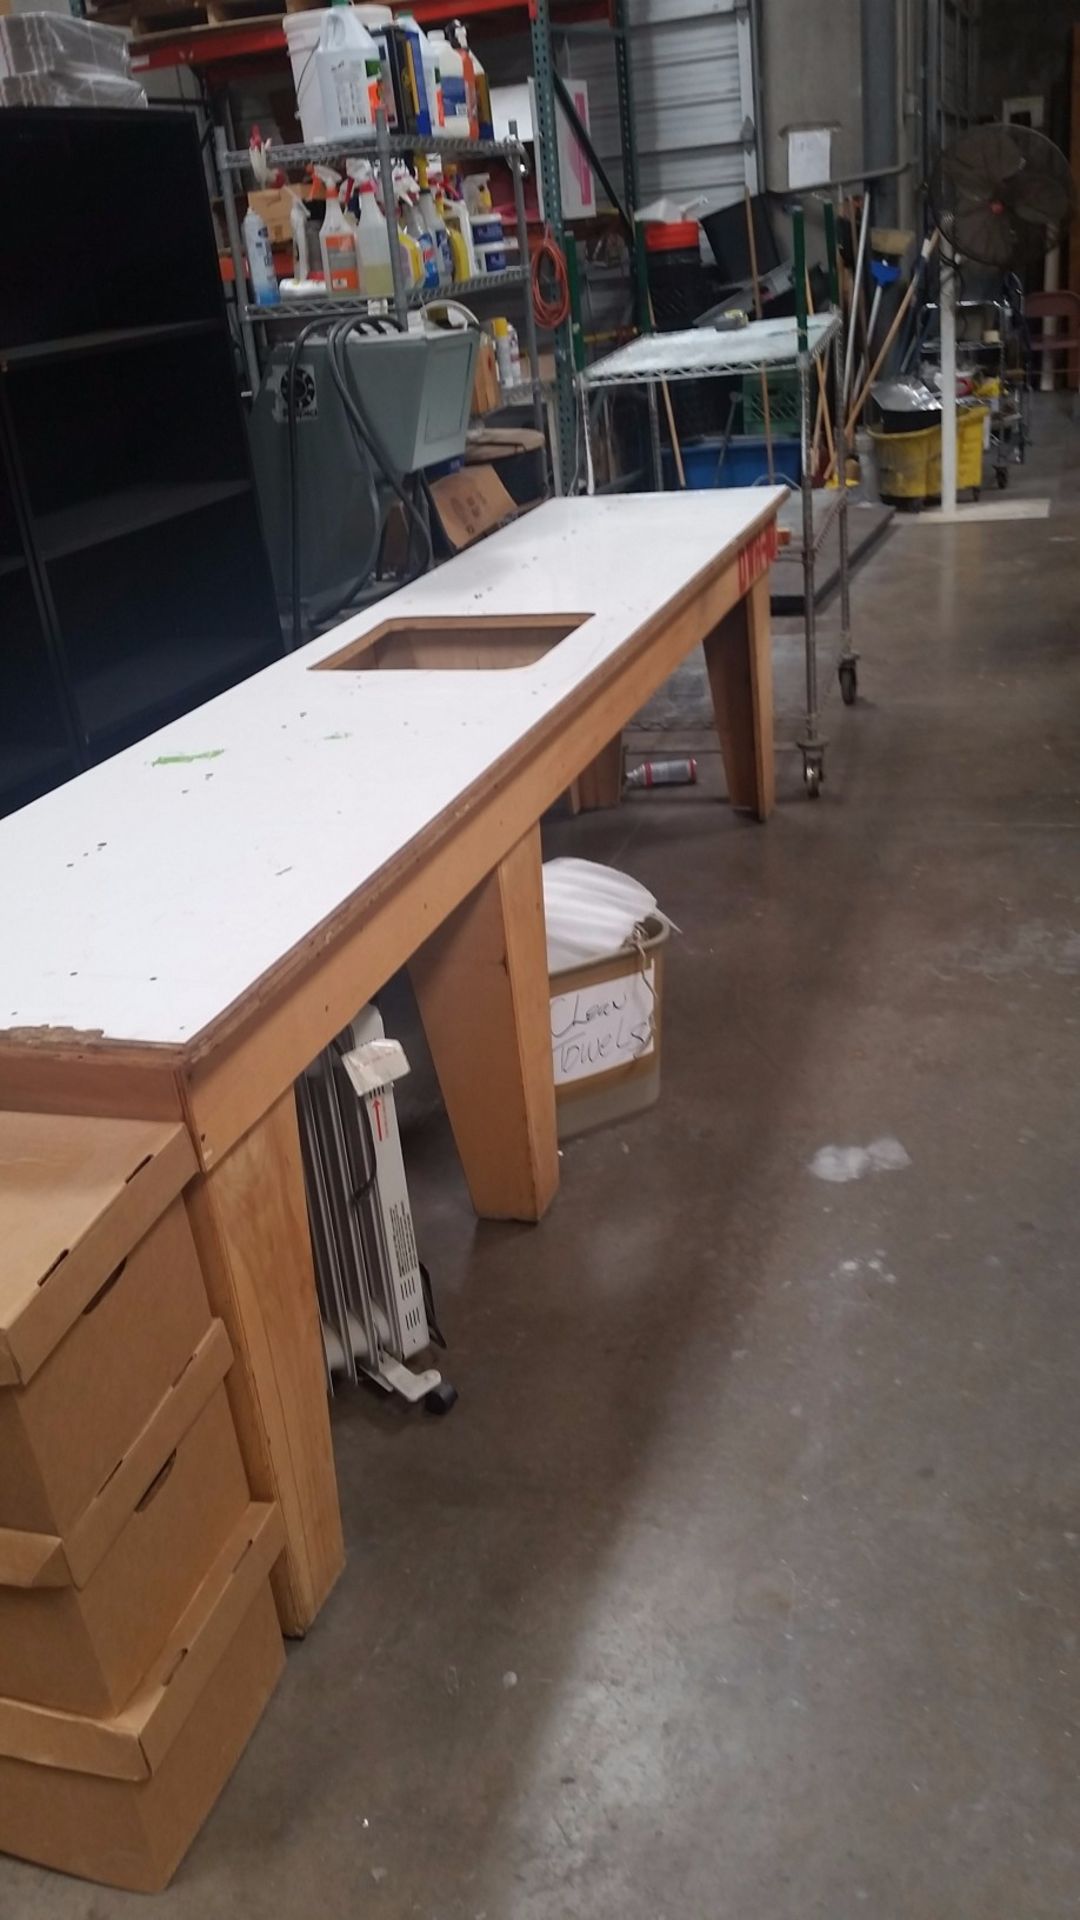 Saw Work Table ,1 USED CHOP SAW /TABLE SAW WORK BENCH 121 1/2" X 26" X 34" (INSERT FOR SAW 16" " X - Image 3 of 6